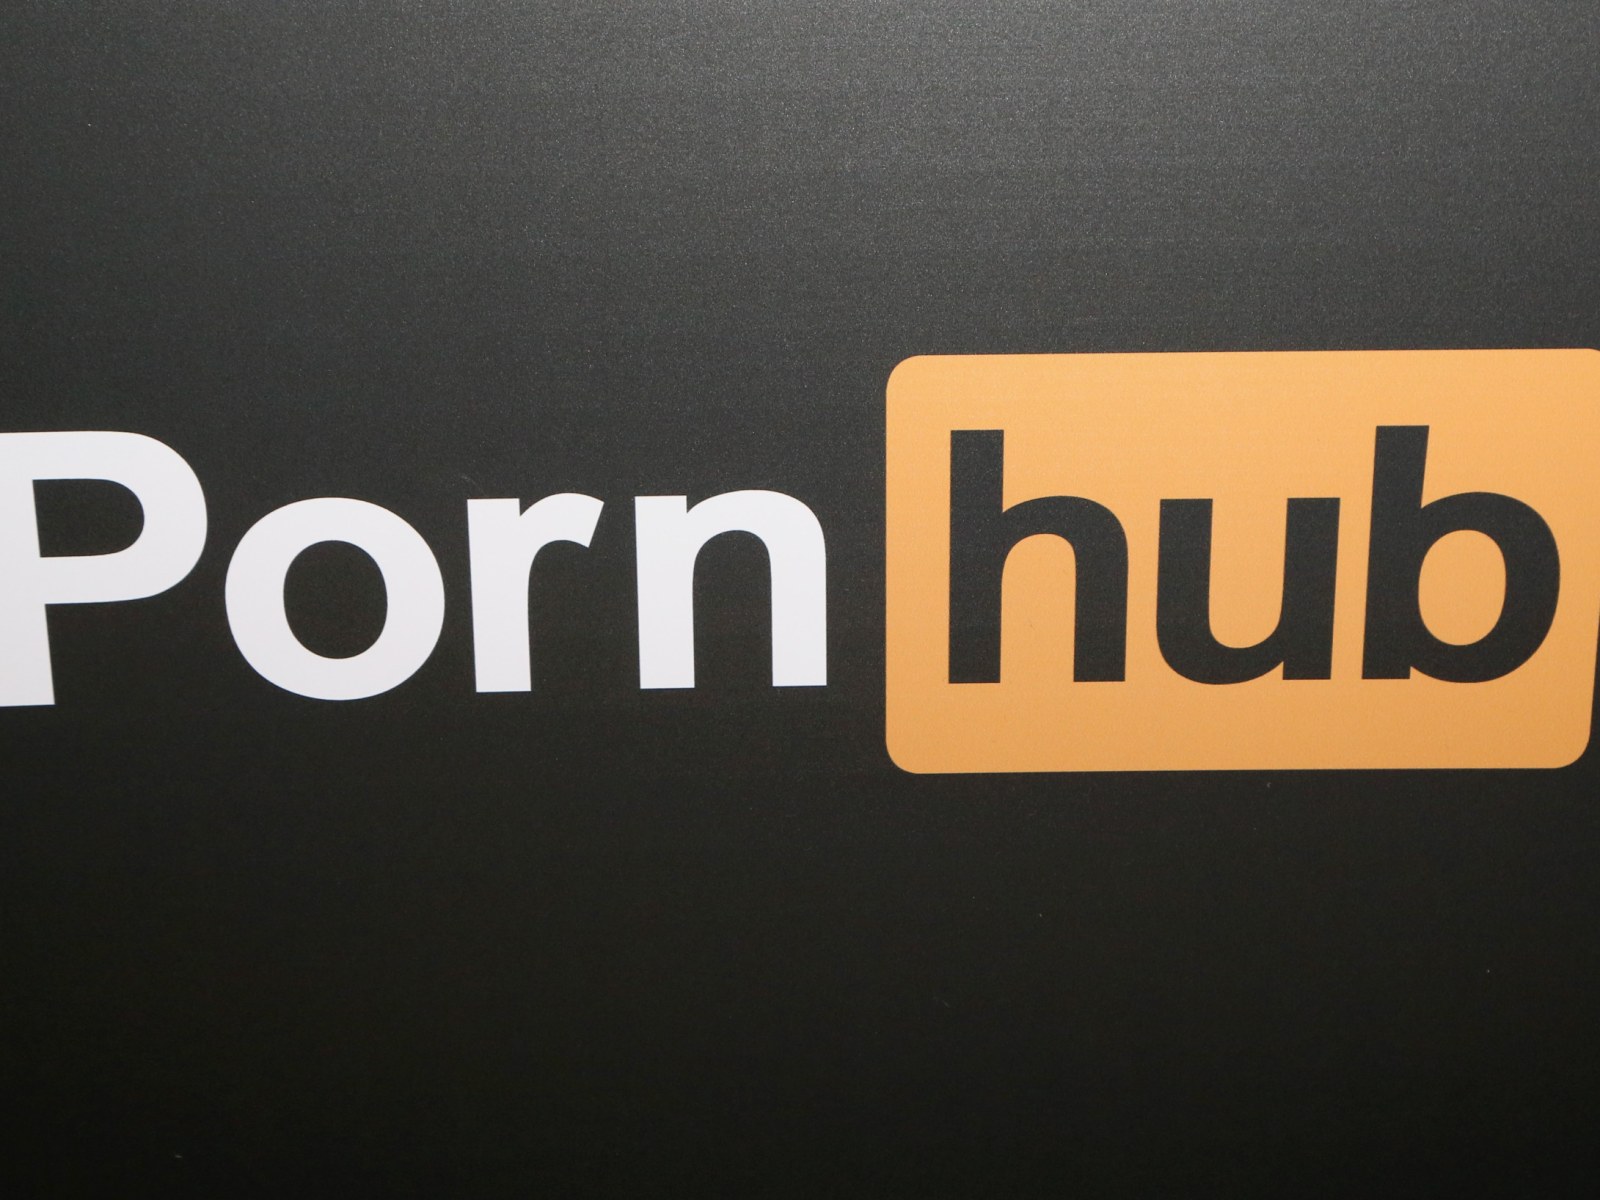 Muslim 15 Yar Sex V - Who Owns Pornhub? What to Know About the Adult Website Company